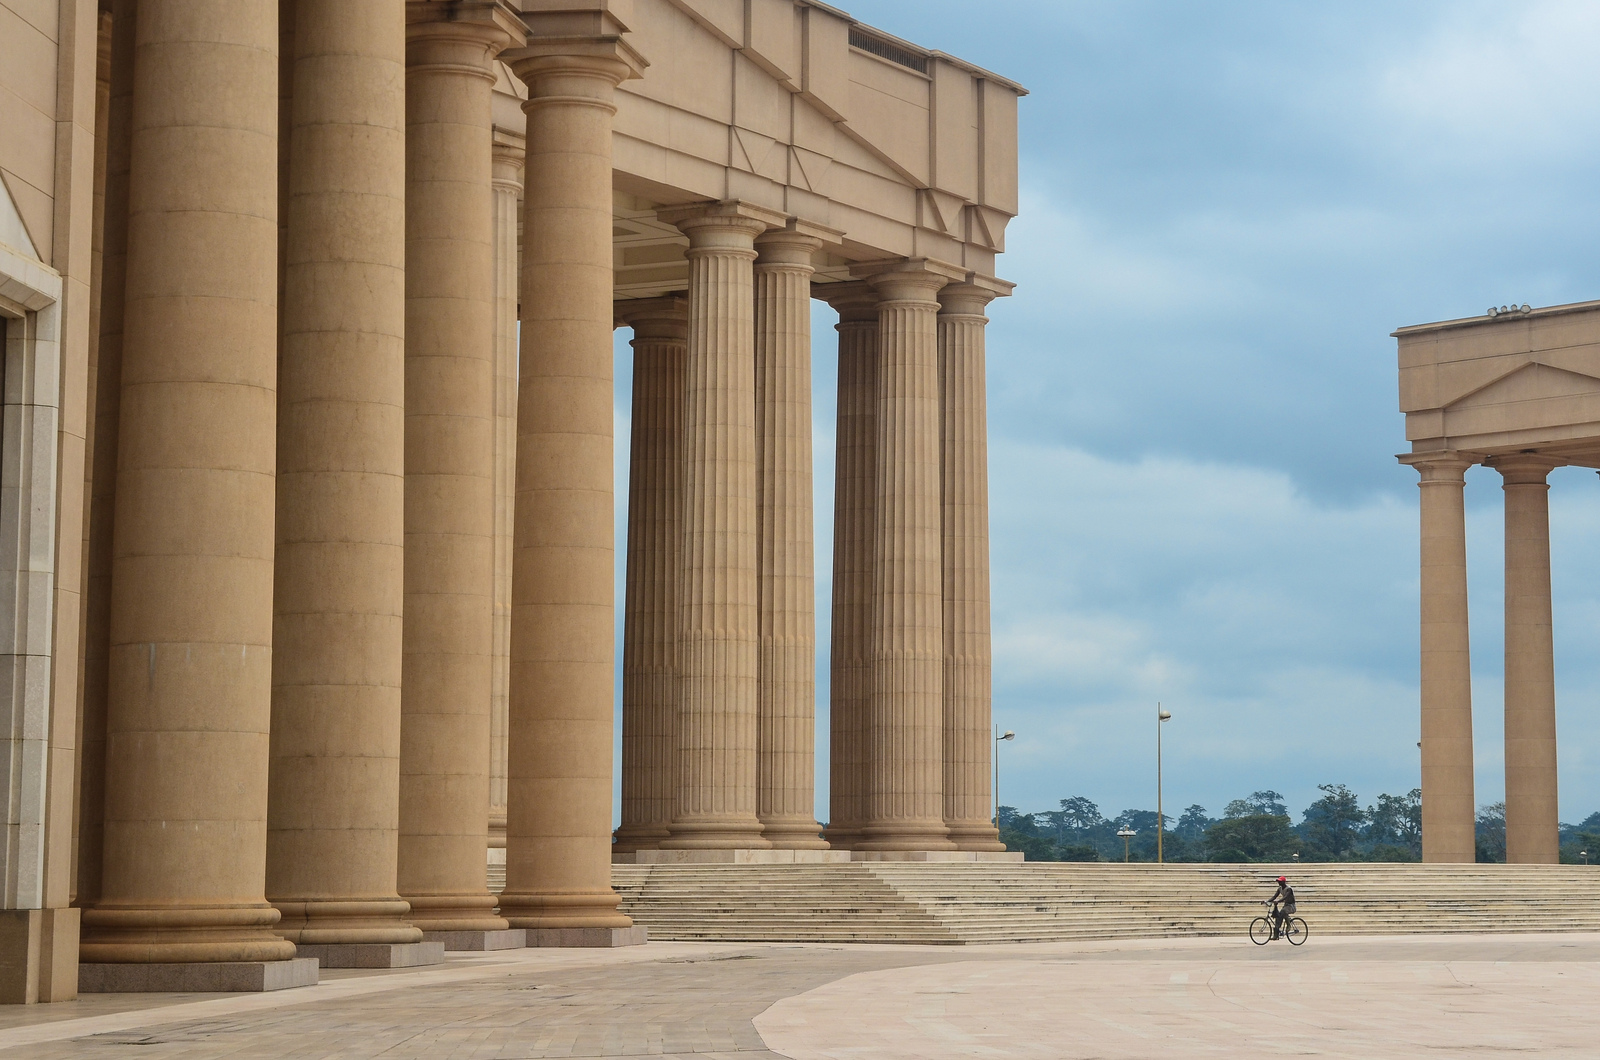 How A Giant Replica Of The Vatican Ended Up In A Small African City